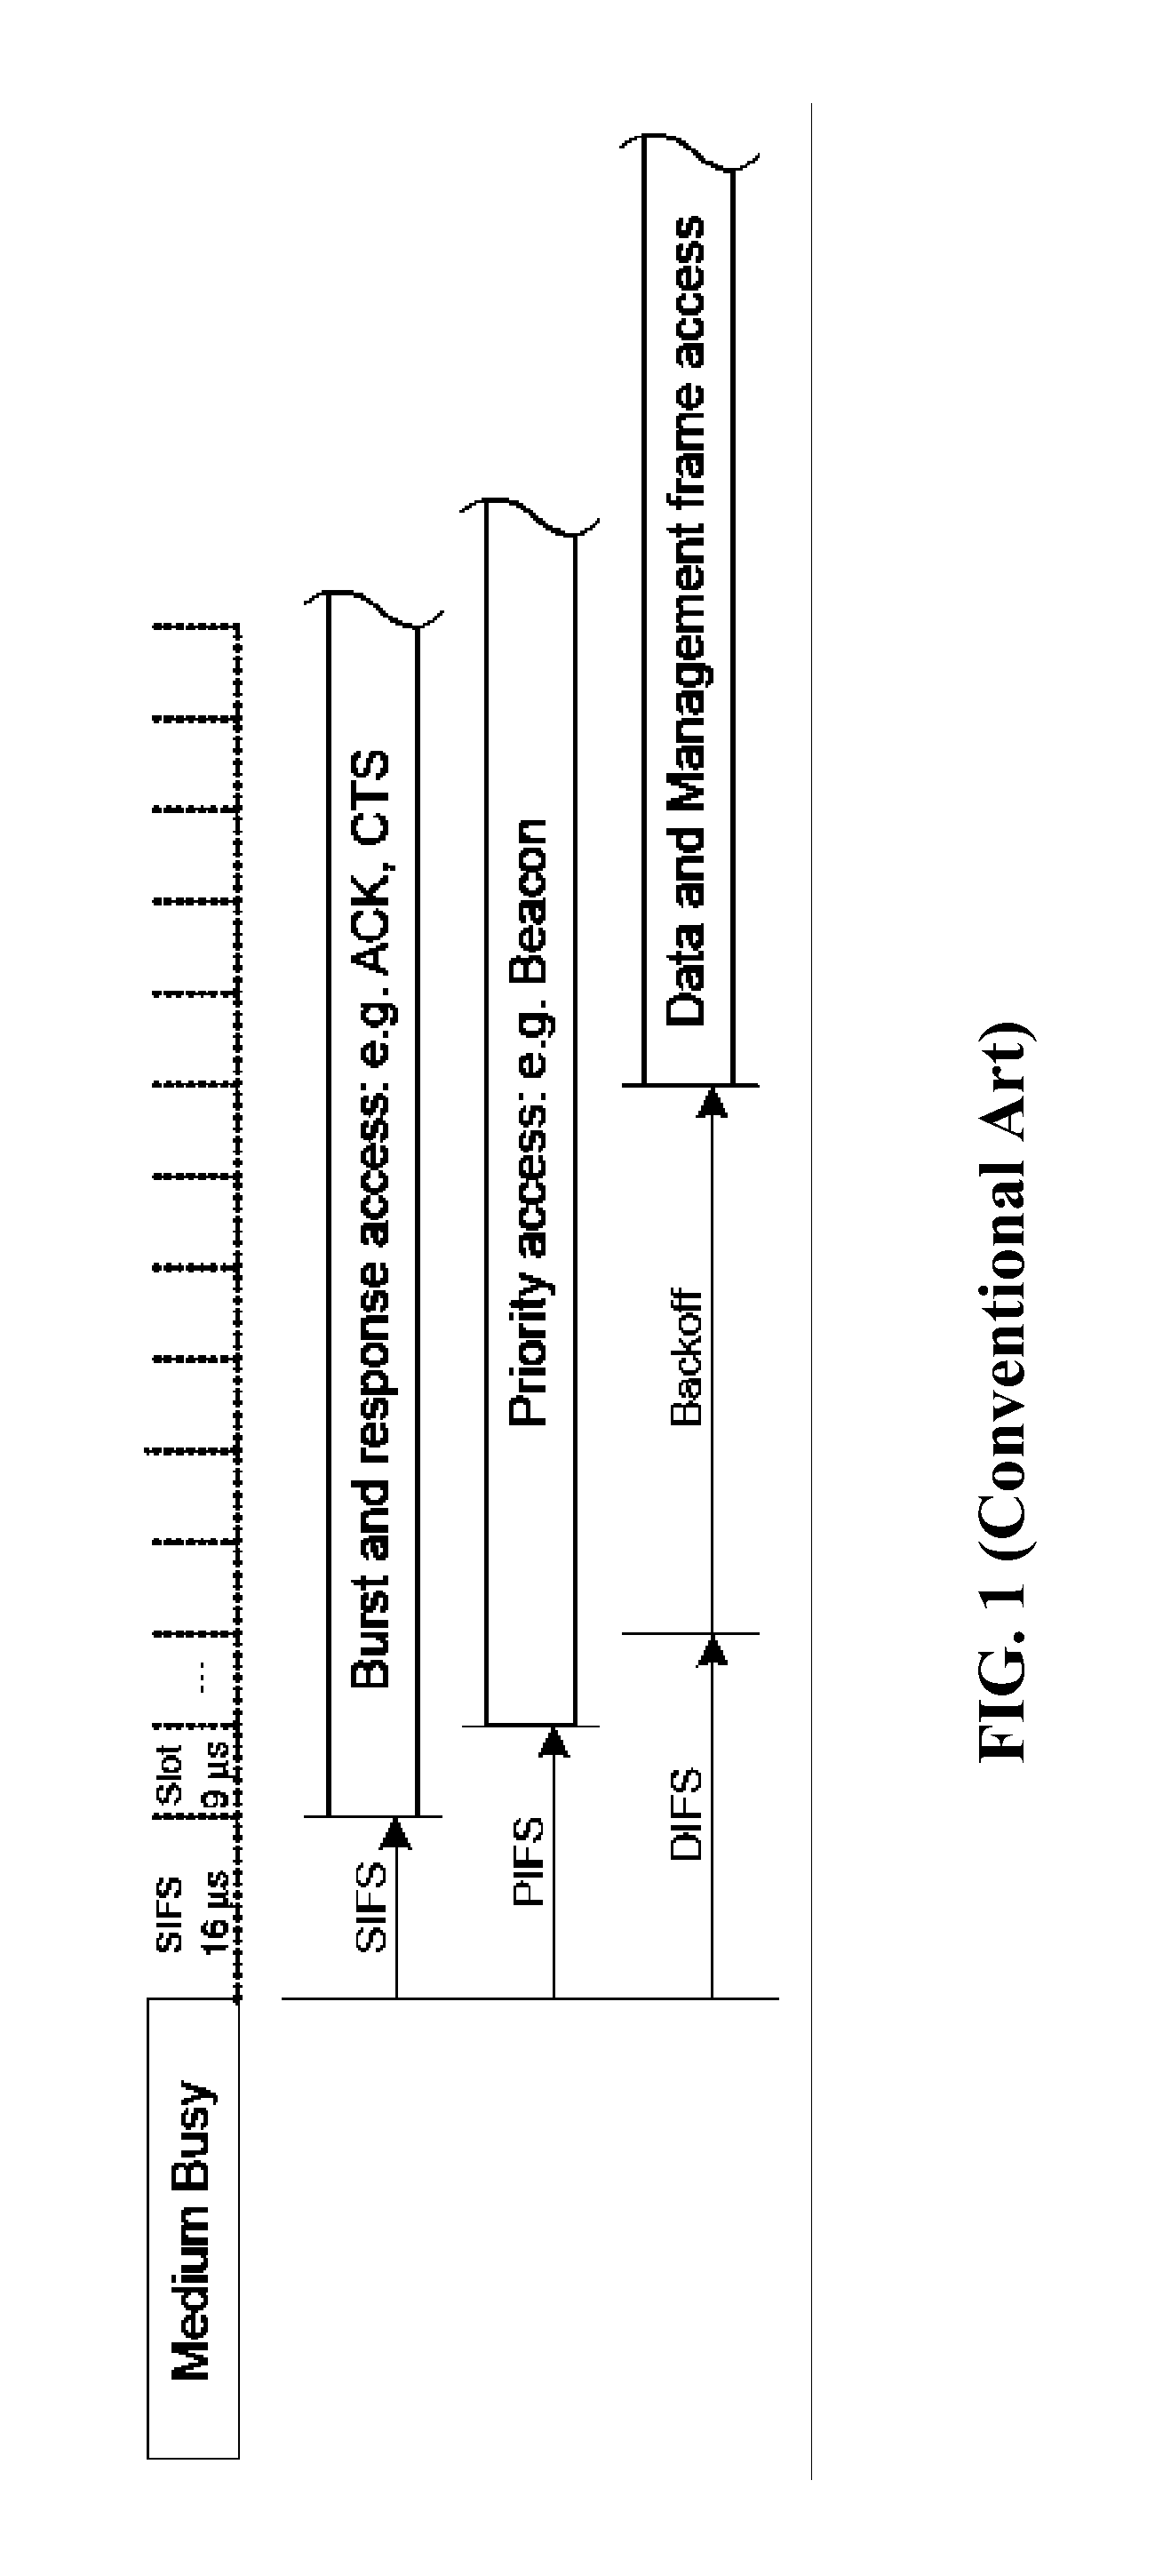 Systems, methods and apparatuses for wireless communication